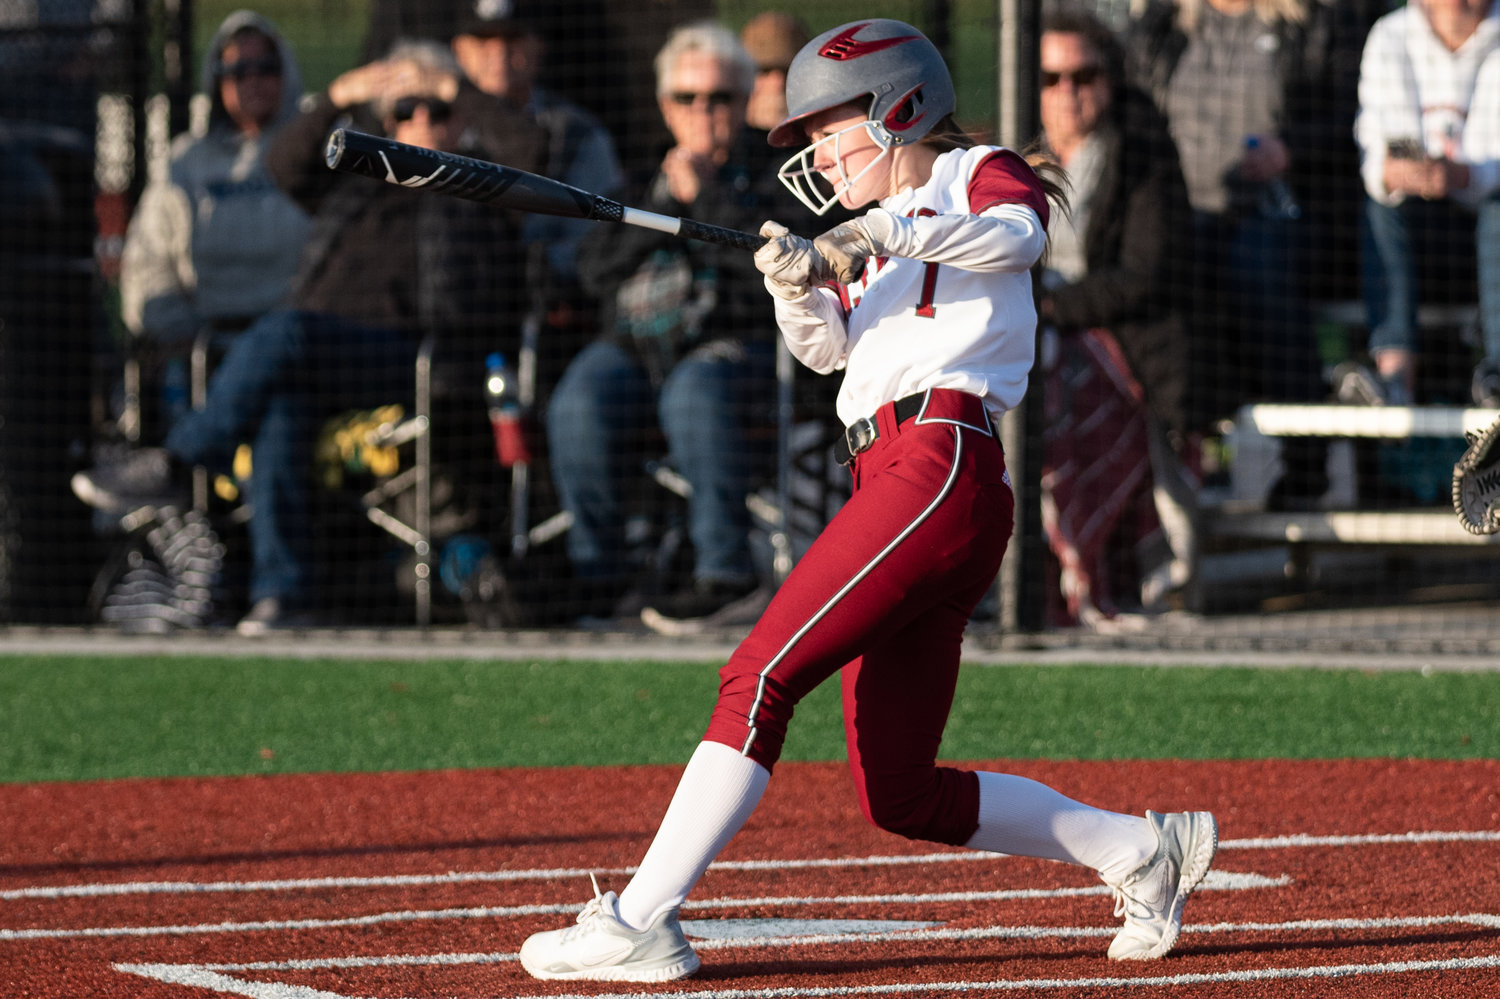 W.F. West infielder Brielle Etter hits the game-tying 2-RBI double in the seventh inning against Tumwater in the 2A District 4 championship game at Rec Park May 20.